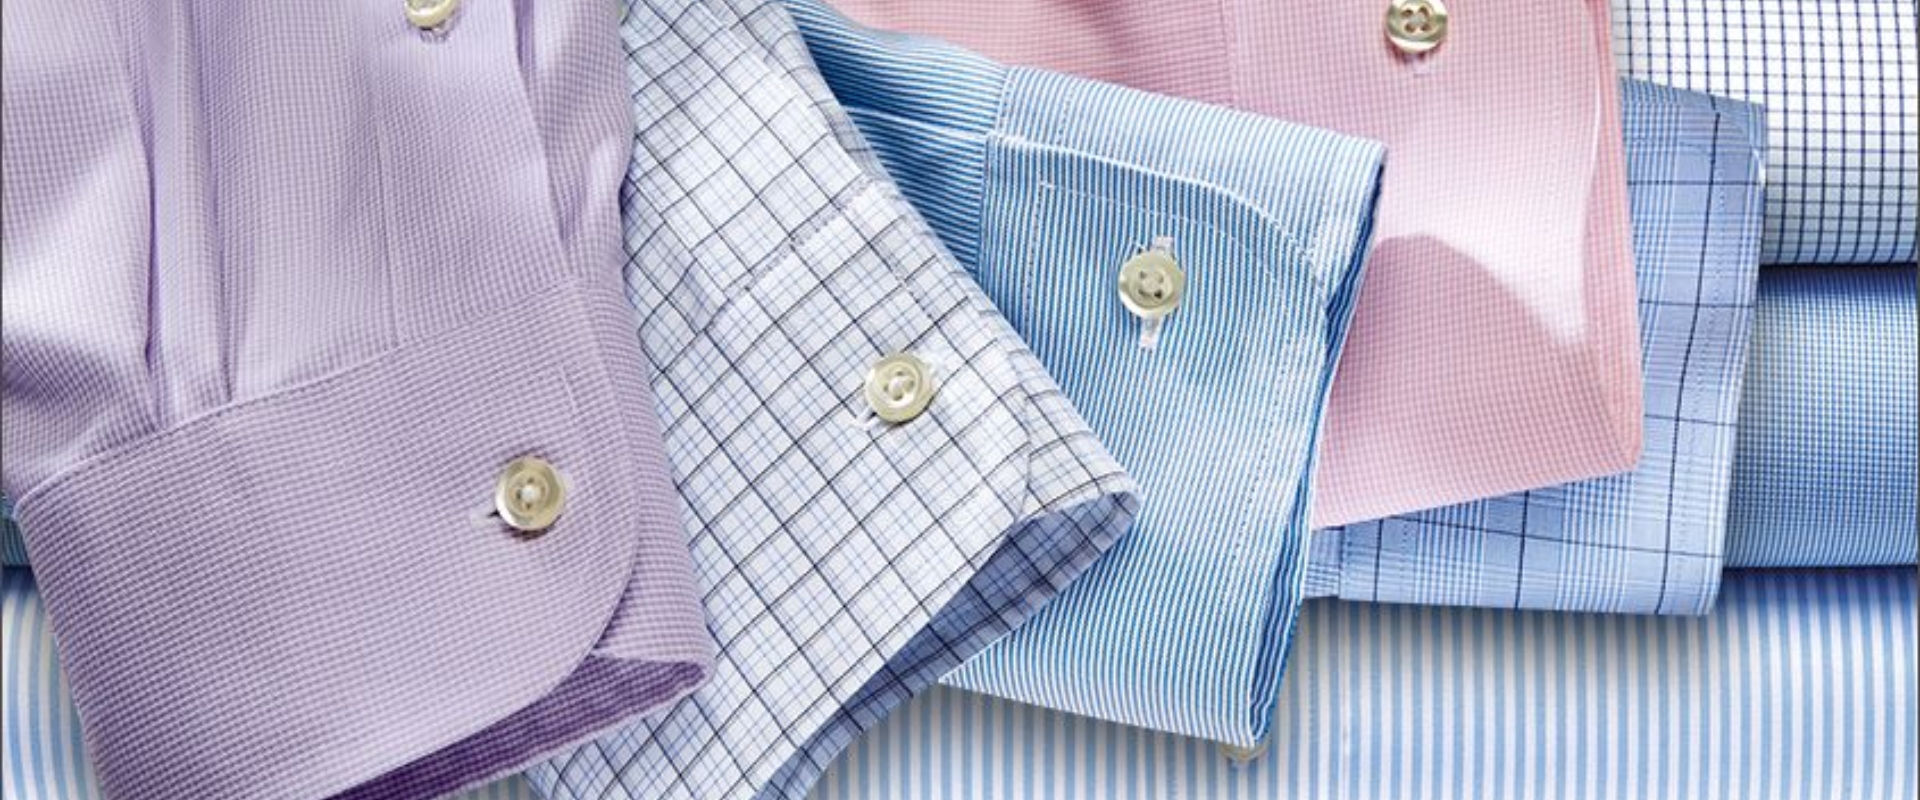 Best fabrics for Shirts (10 types of favorite materials) - SewGuide